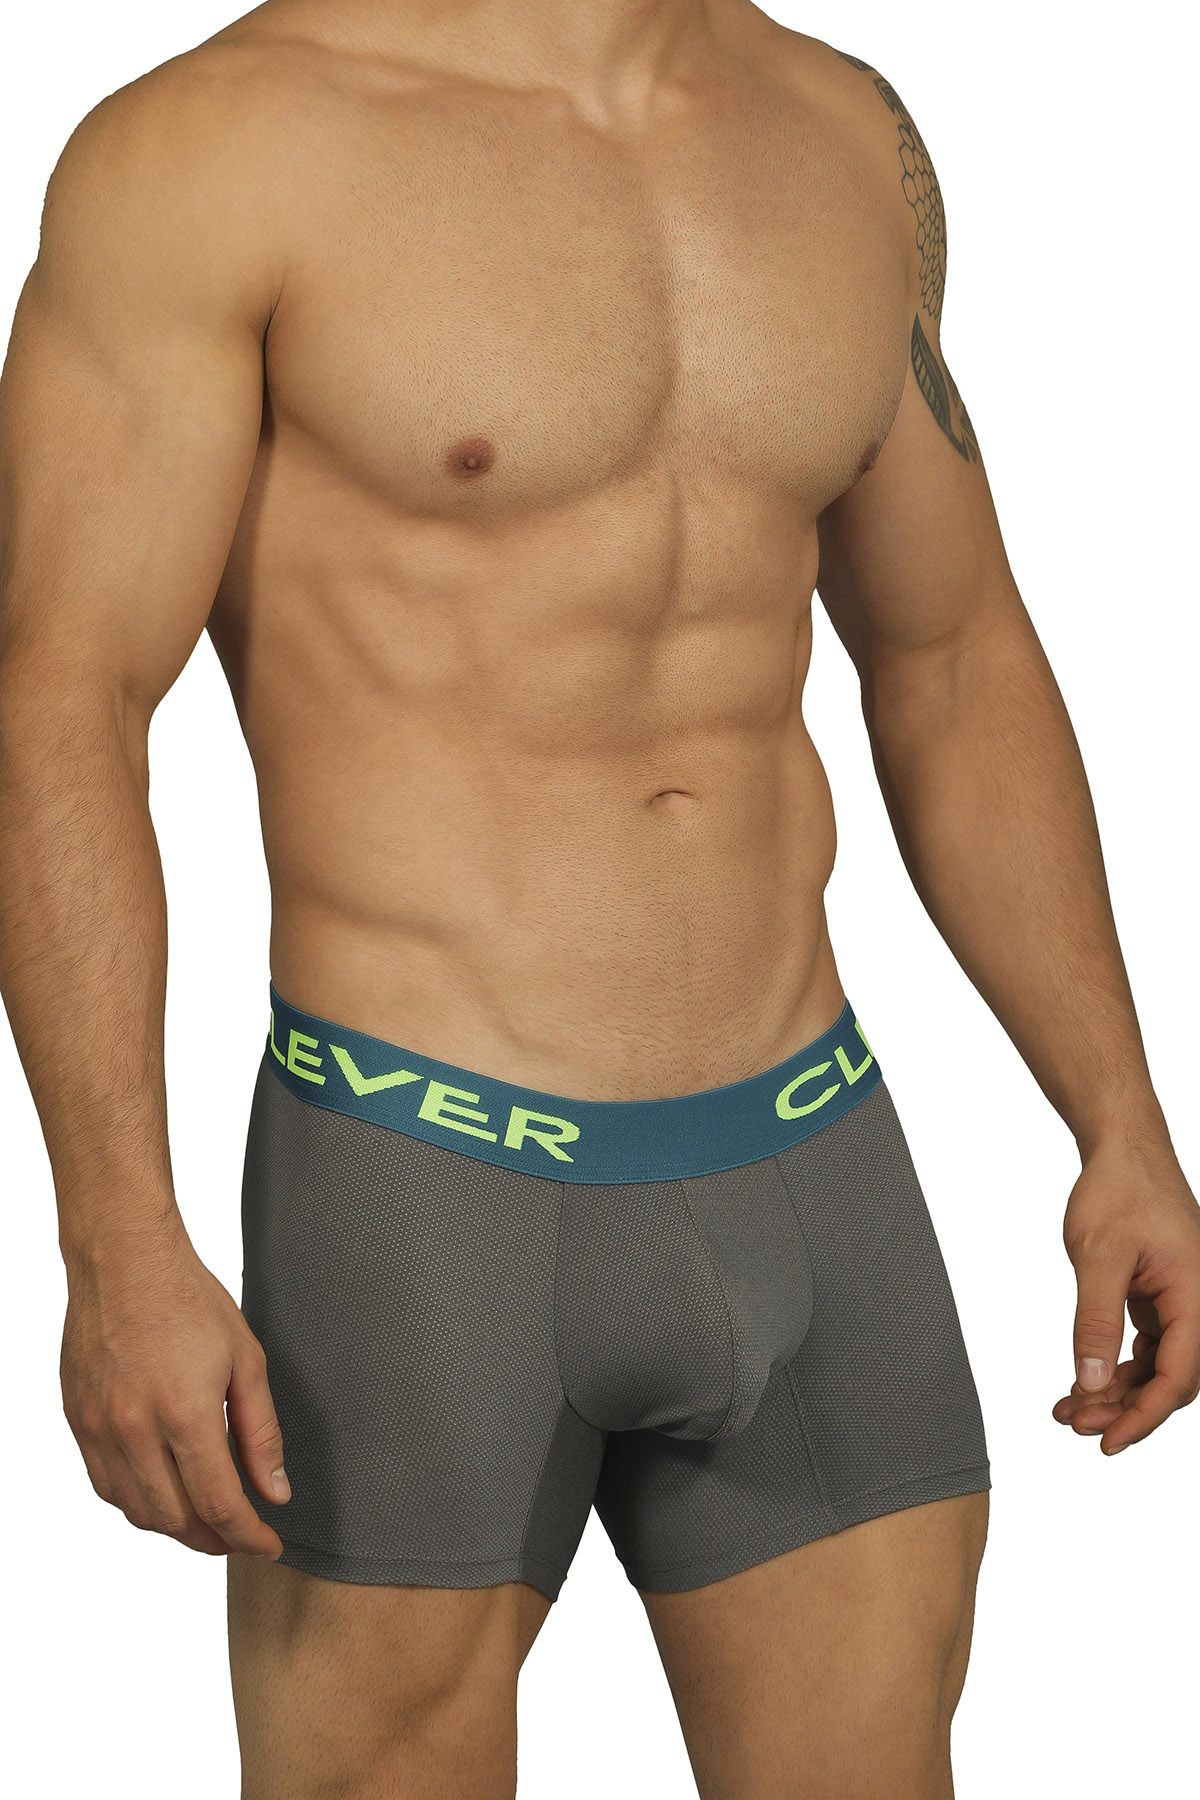 Clever Limited Edition Grey Boxer 229903